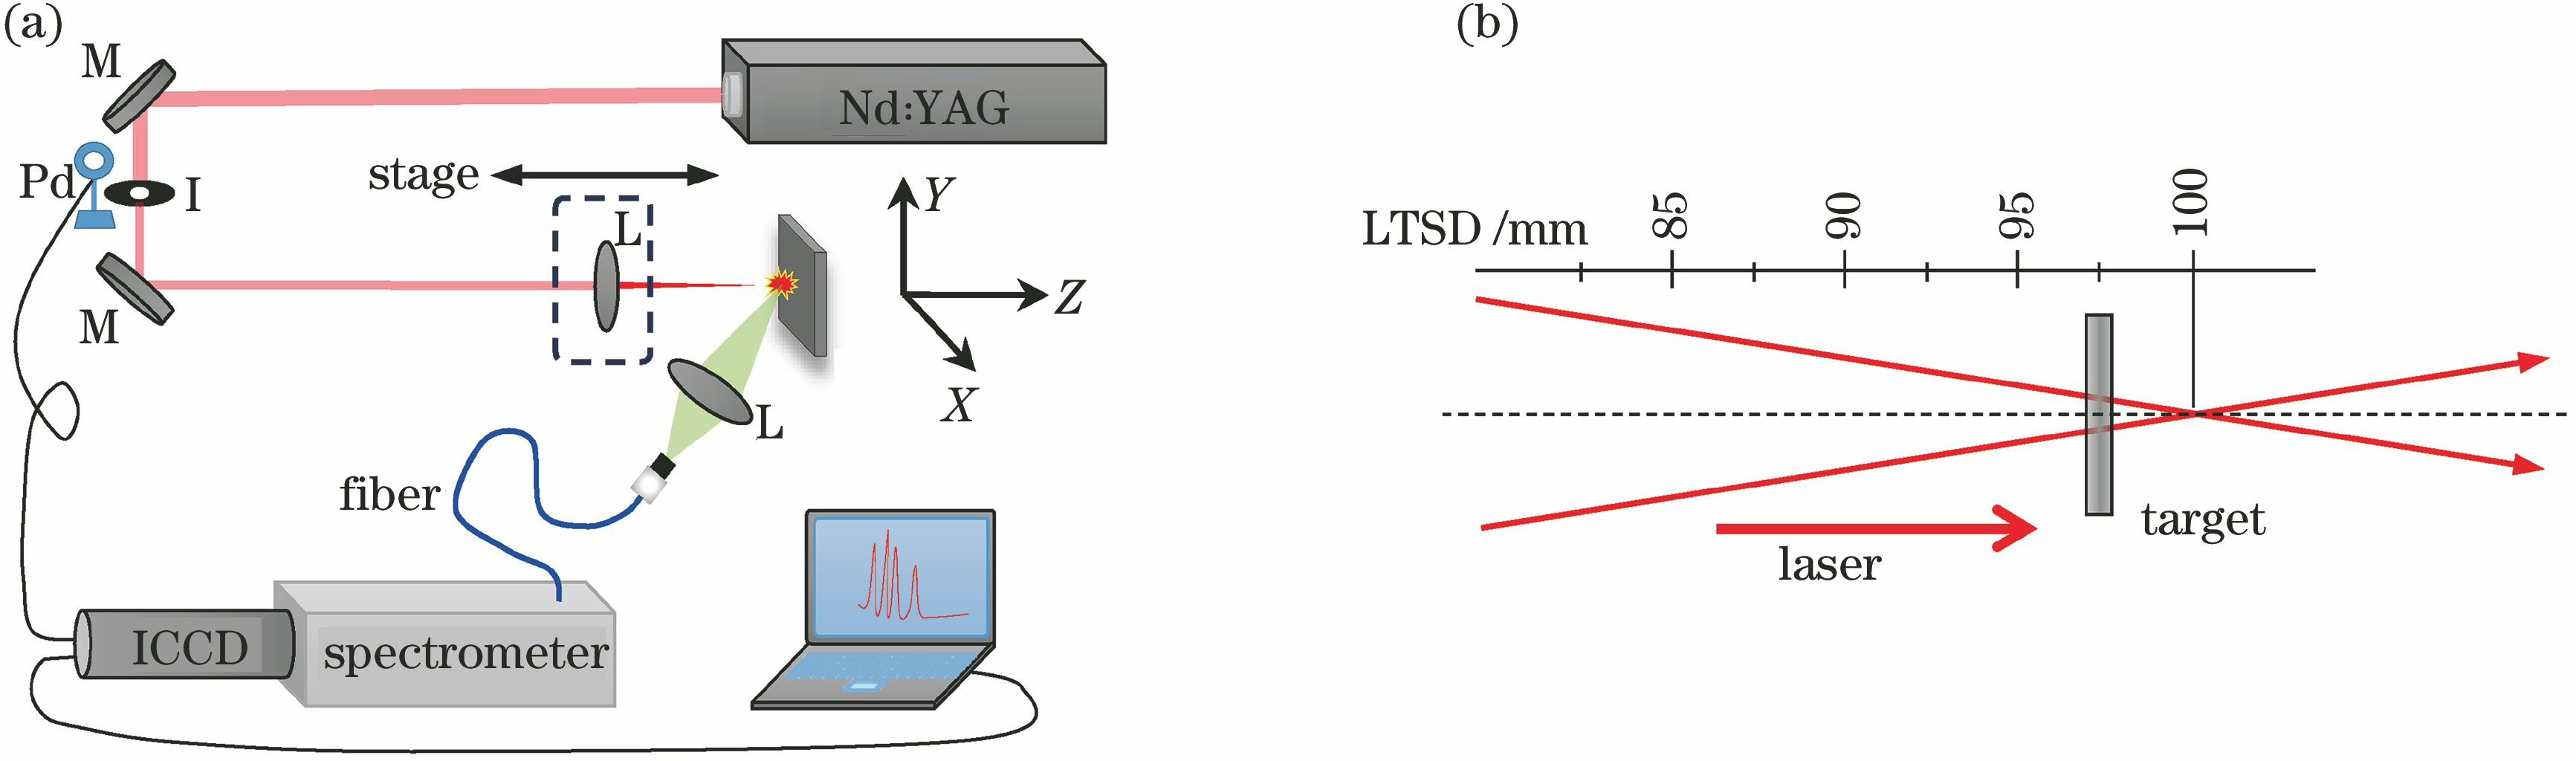 Schematics. (a) Experimental setup for analyzing influence of LTSD on spectral intensity in LIBS;(b) relationship between sample location and LTSD